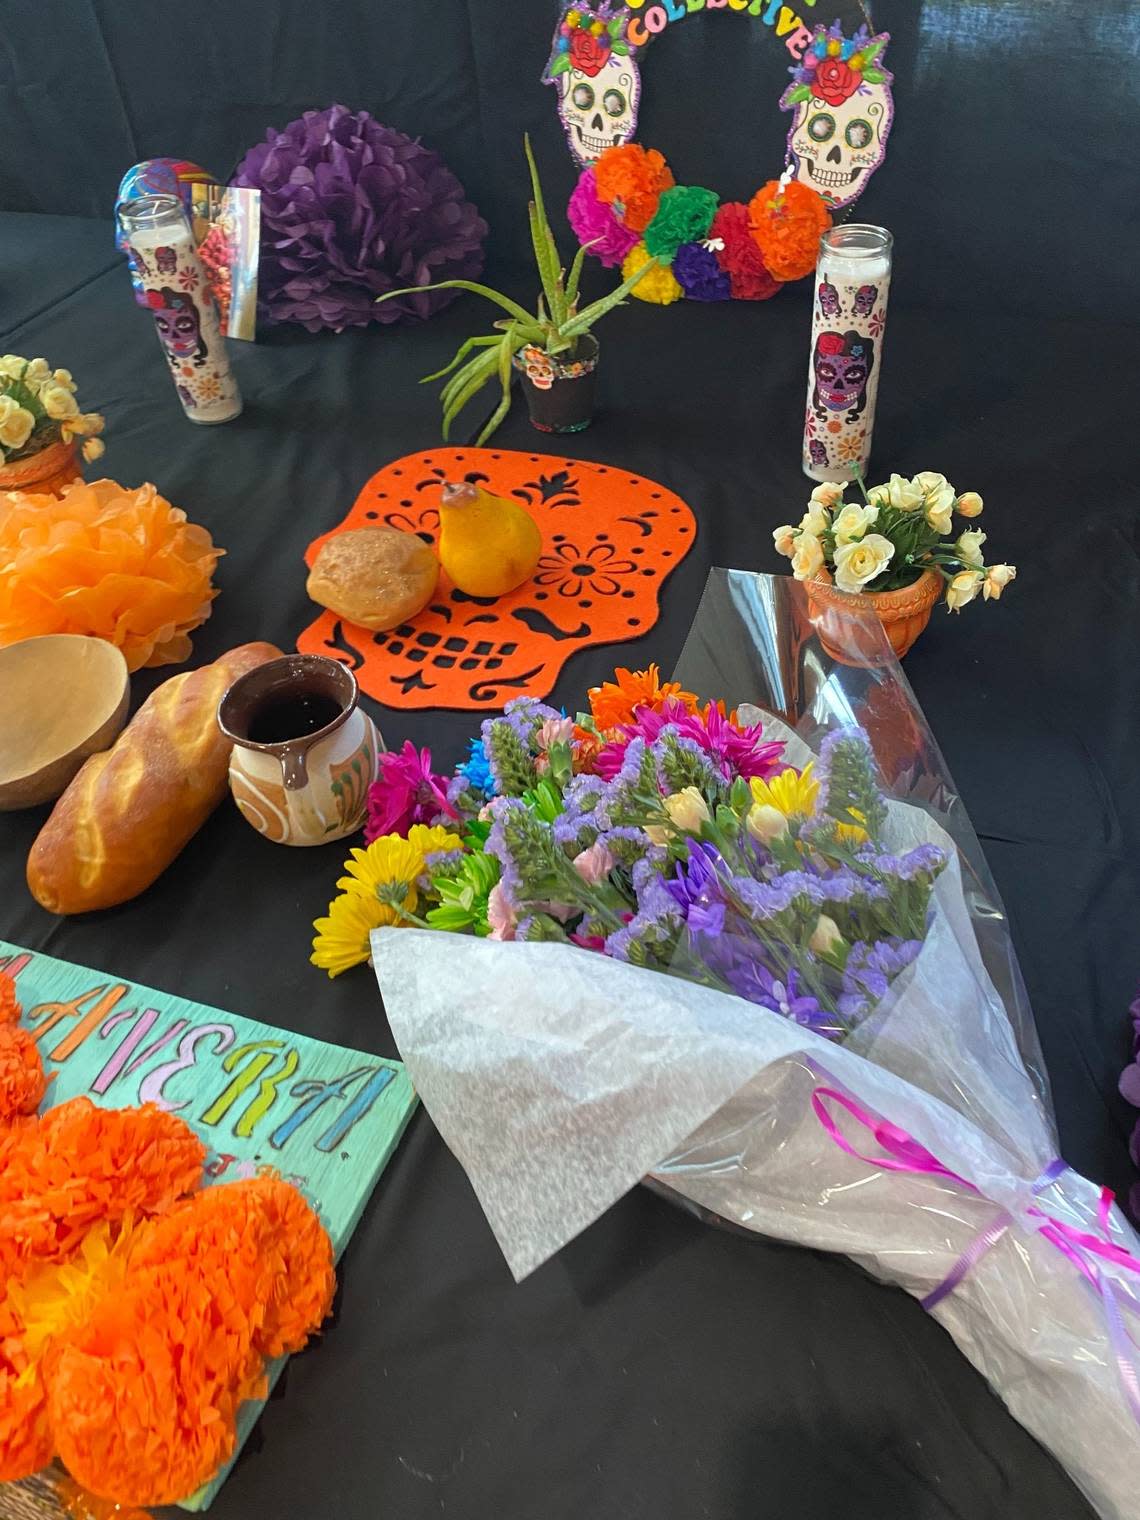 Food, flowers and art are some of the items placed on a community altar Saturday at the Eastside Community Center for Dia de los Muertos. 